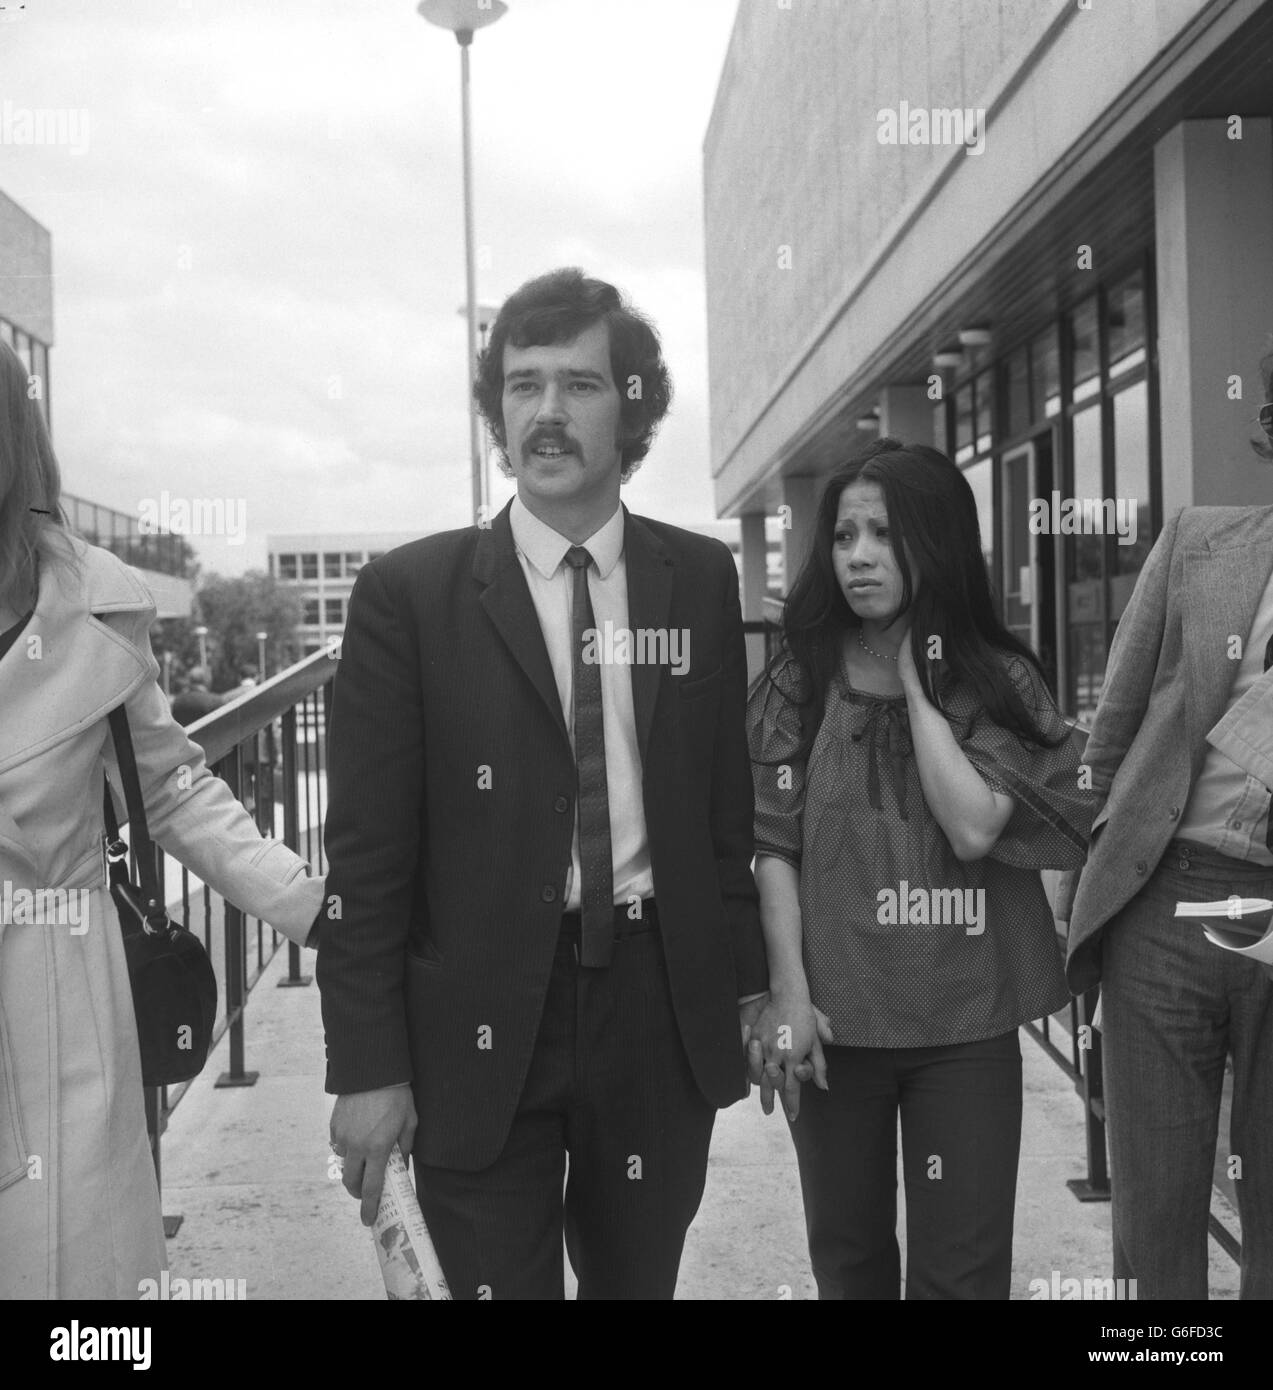 David Tilson at St Albans after the trial of Graham Young at St Albans Crown Court. Mr Tilson is one of the two men Graham Young was found guilty of attempting to murder at the John Hadland Limited factory at Bovingdon, Hertfordshire. Stock Photo